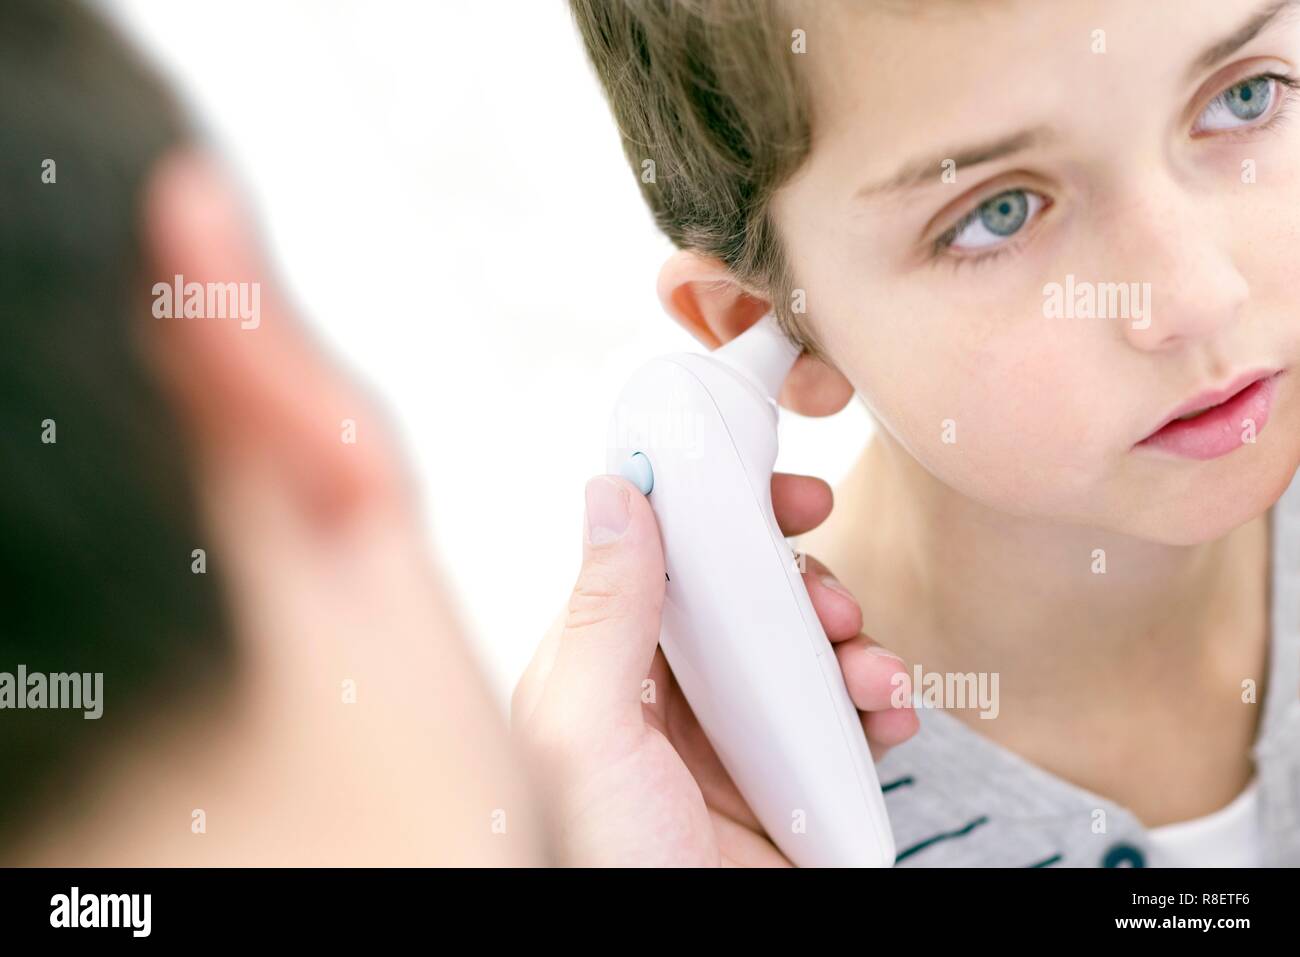 Boy having his temperature taken with a digital thermometer. Stock Photo